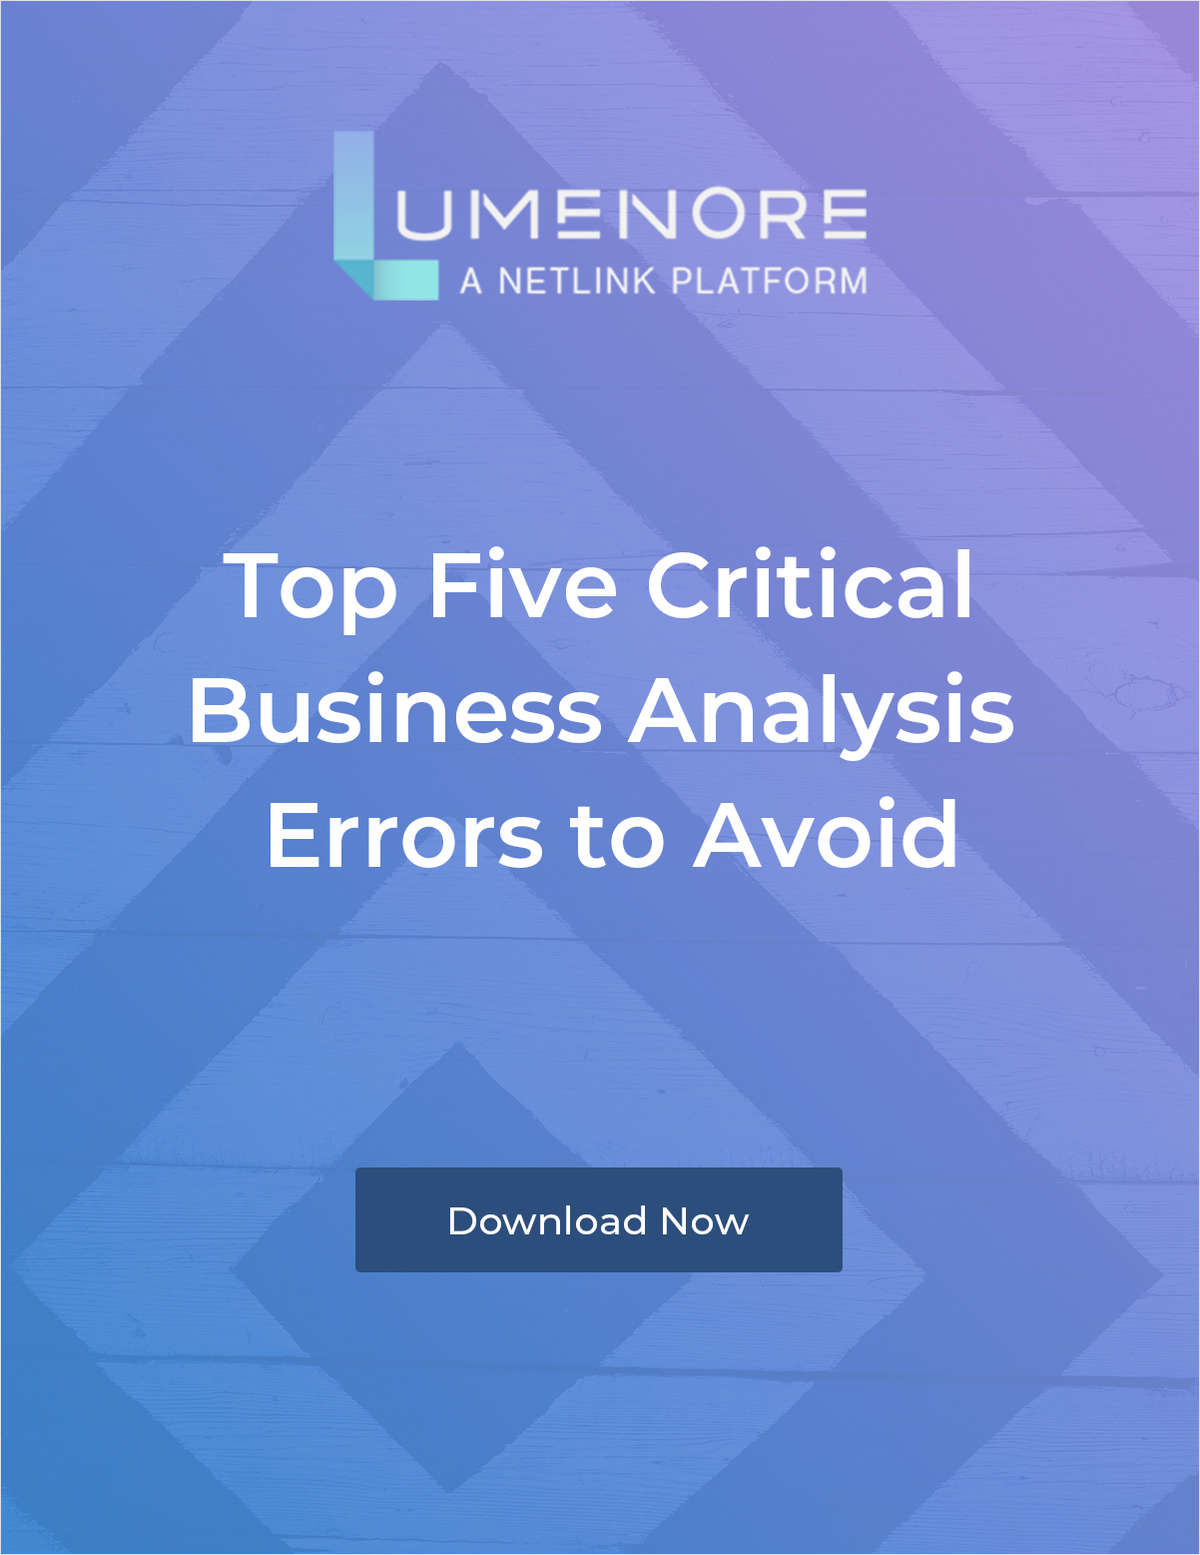 The Top 5 Business Analysis Errors to Avoid